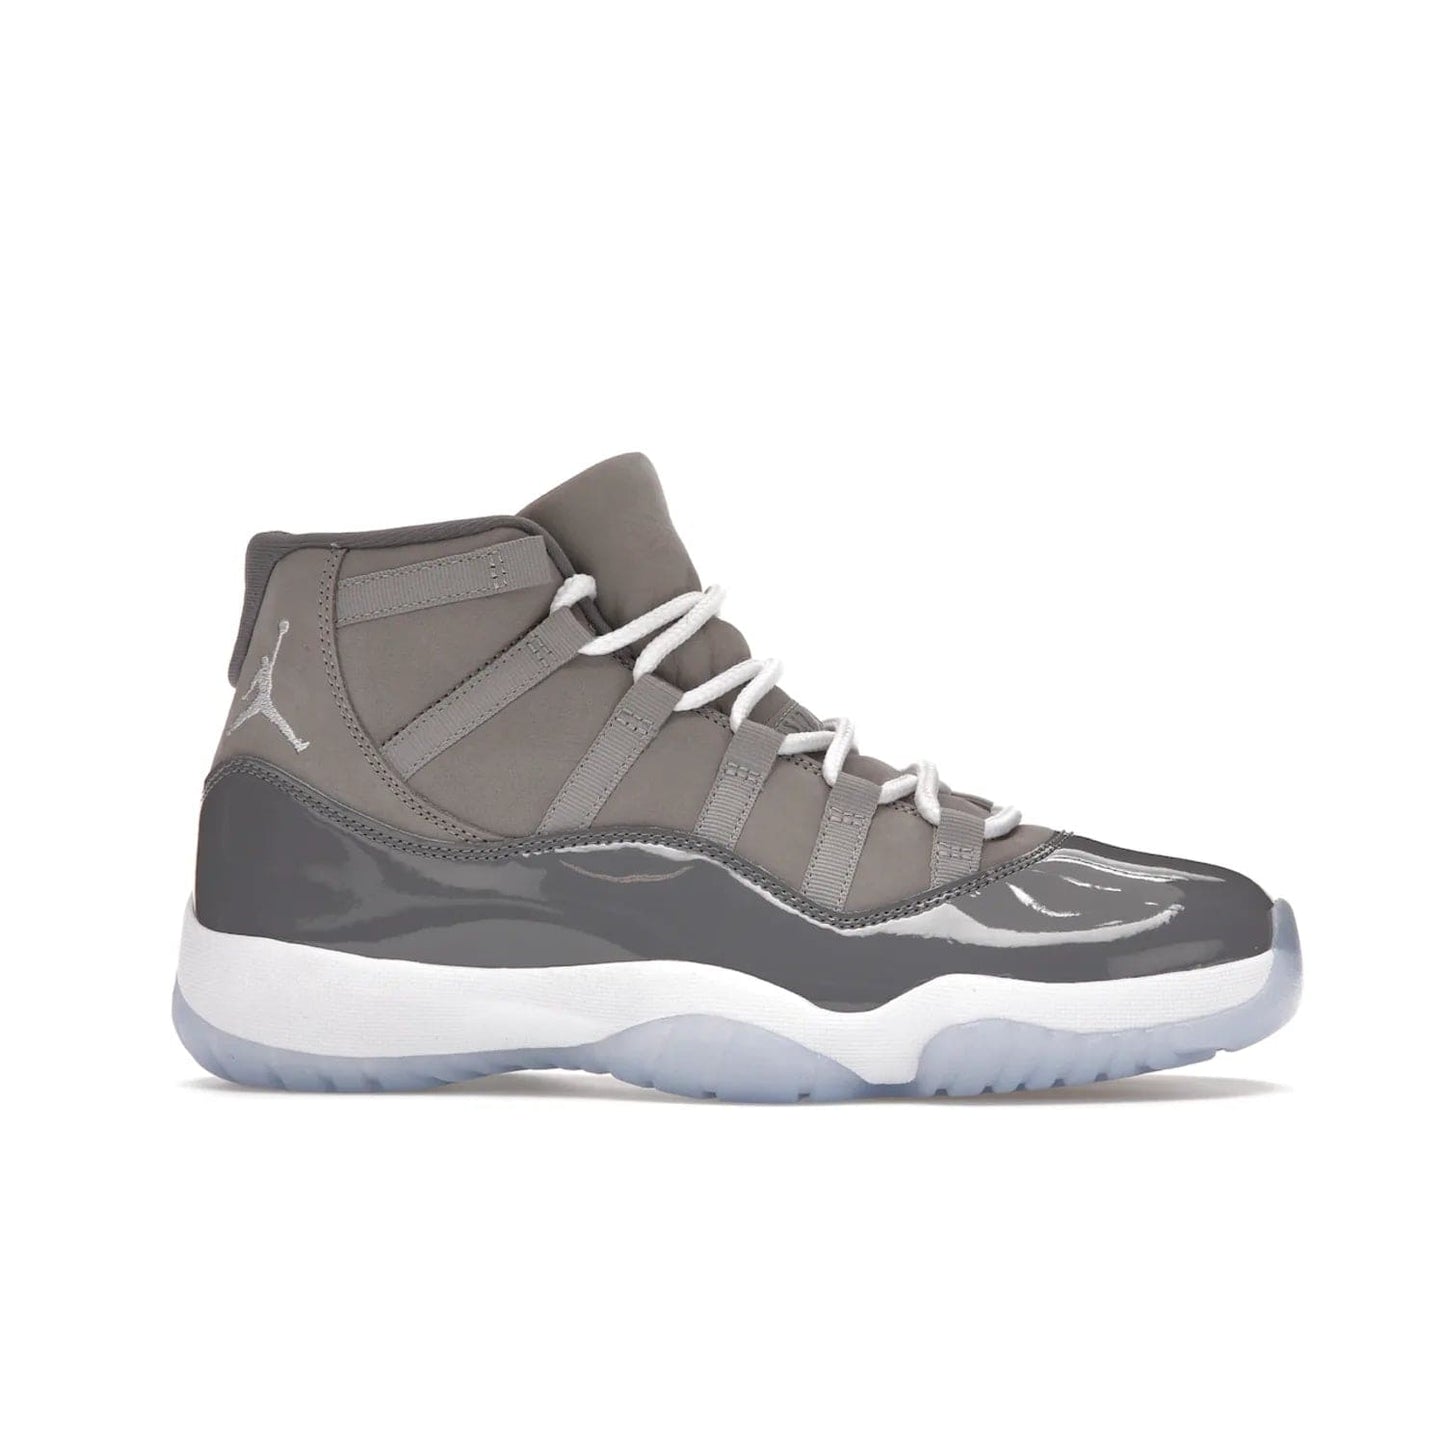 Jordan 11 Retro Cool Grey (2021) - Image 2 - Only at www.BallersClubKickz.com - Shop the Air Jordan 11 Retro Cool Grey (2021) for a must-have sneaker with a Cool Grey Durabuck upper, patent leather overlays, signature Jumpman embroidery, a white midsole, icy blue translucent outsole, and Multi-Color accents.  Released in December 2021 for $225.